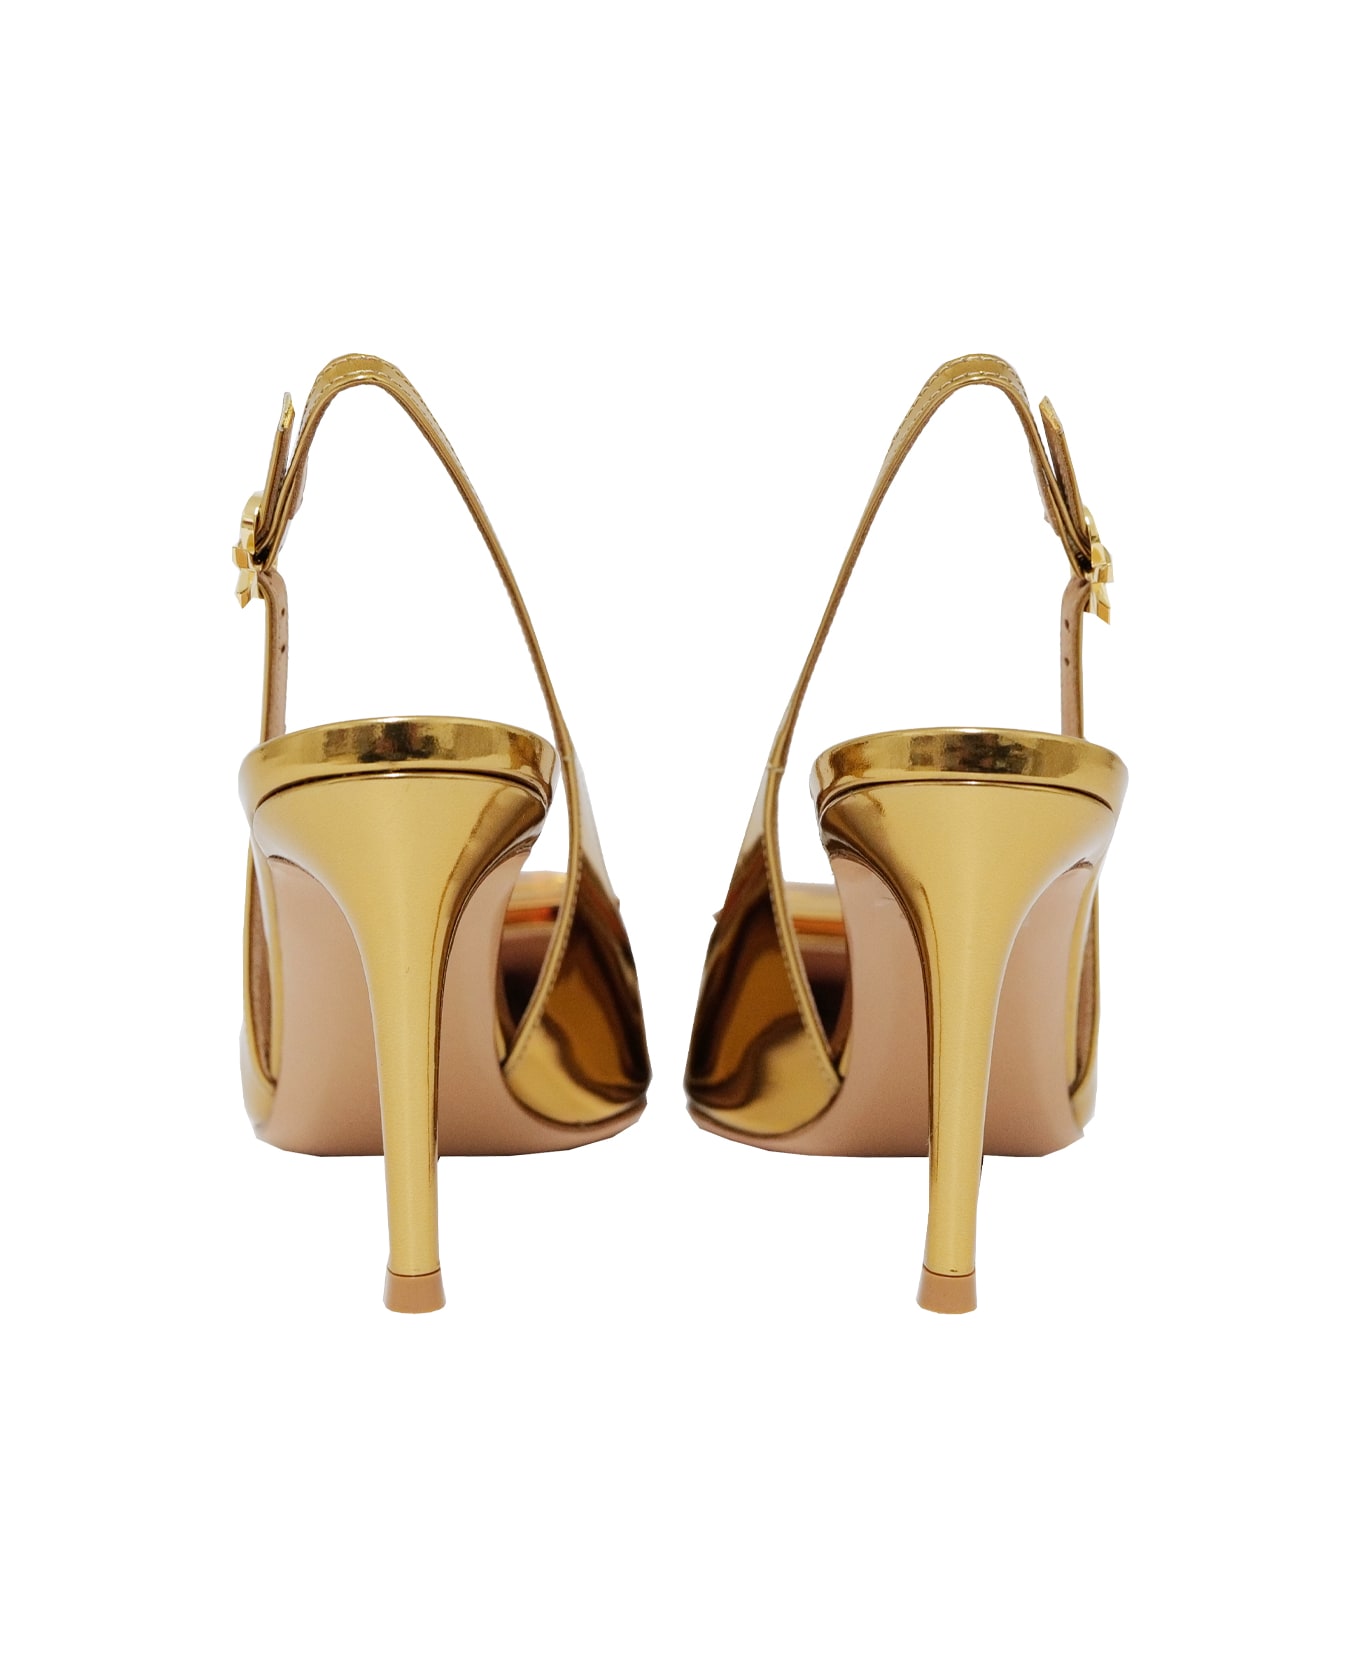 Gianvito Rossi ''jaipur Sling'' Shoes With Heels - Golden ハイヒール